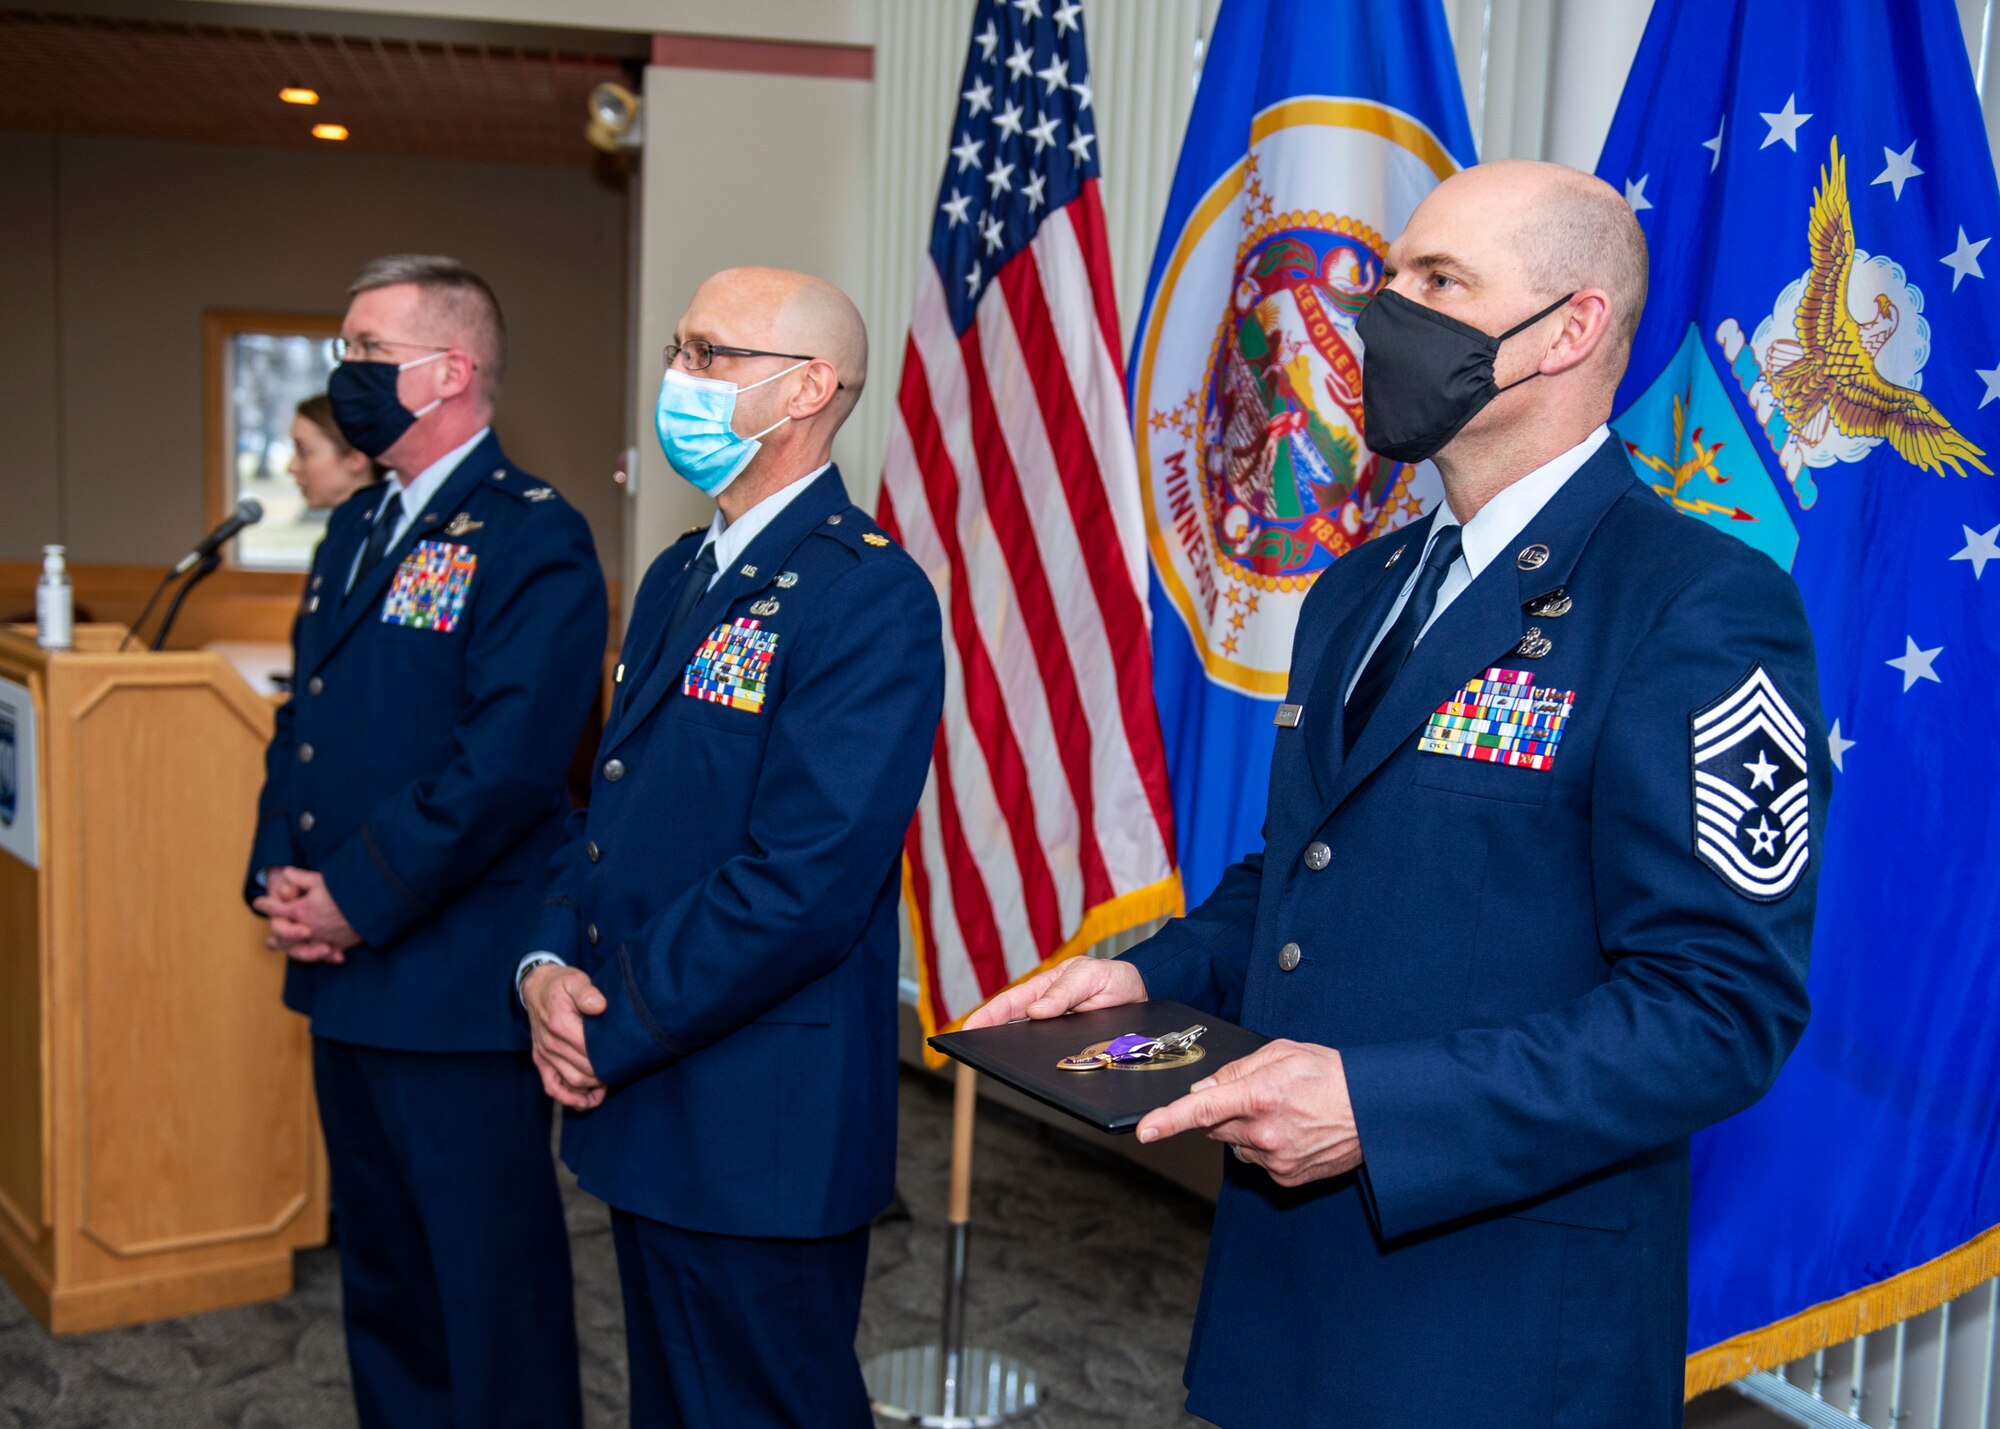 U.S. Air Force Maj. Allen Thill receives the Purple Heart award after sustaining injuries during his most recent deployment to Iraq in St. Paul, Minn., Dec. 12, 2020.